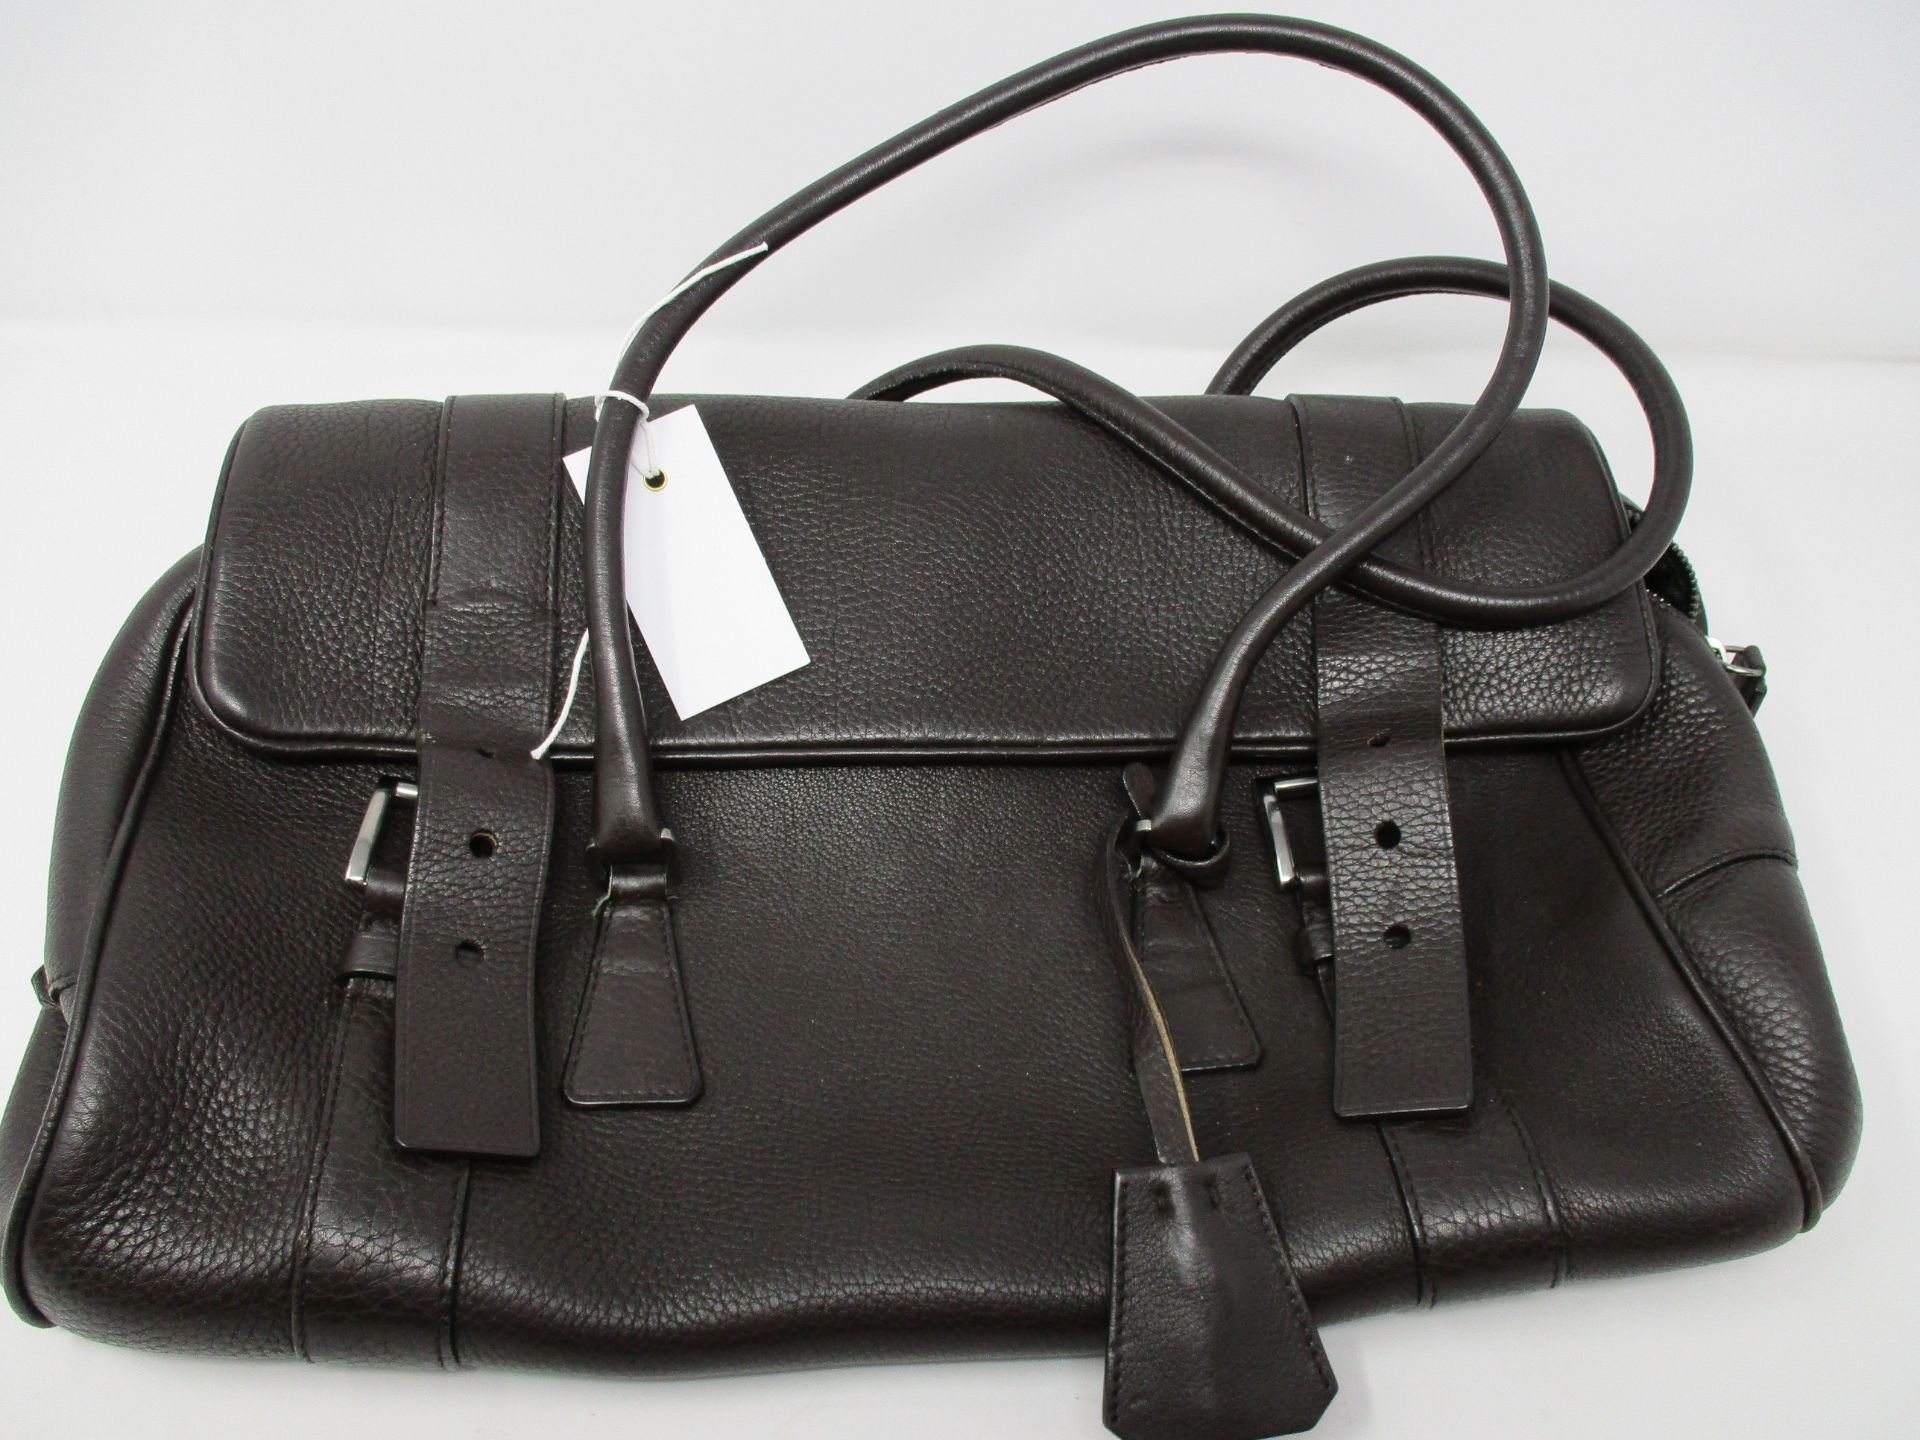 One pre-owned Prada dark brown leather handbag (Side of the internal coating is unstitched).